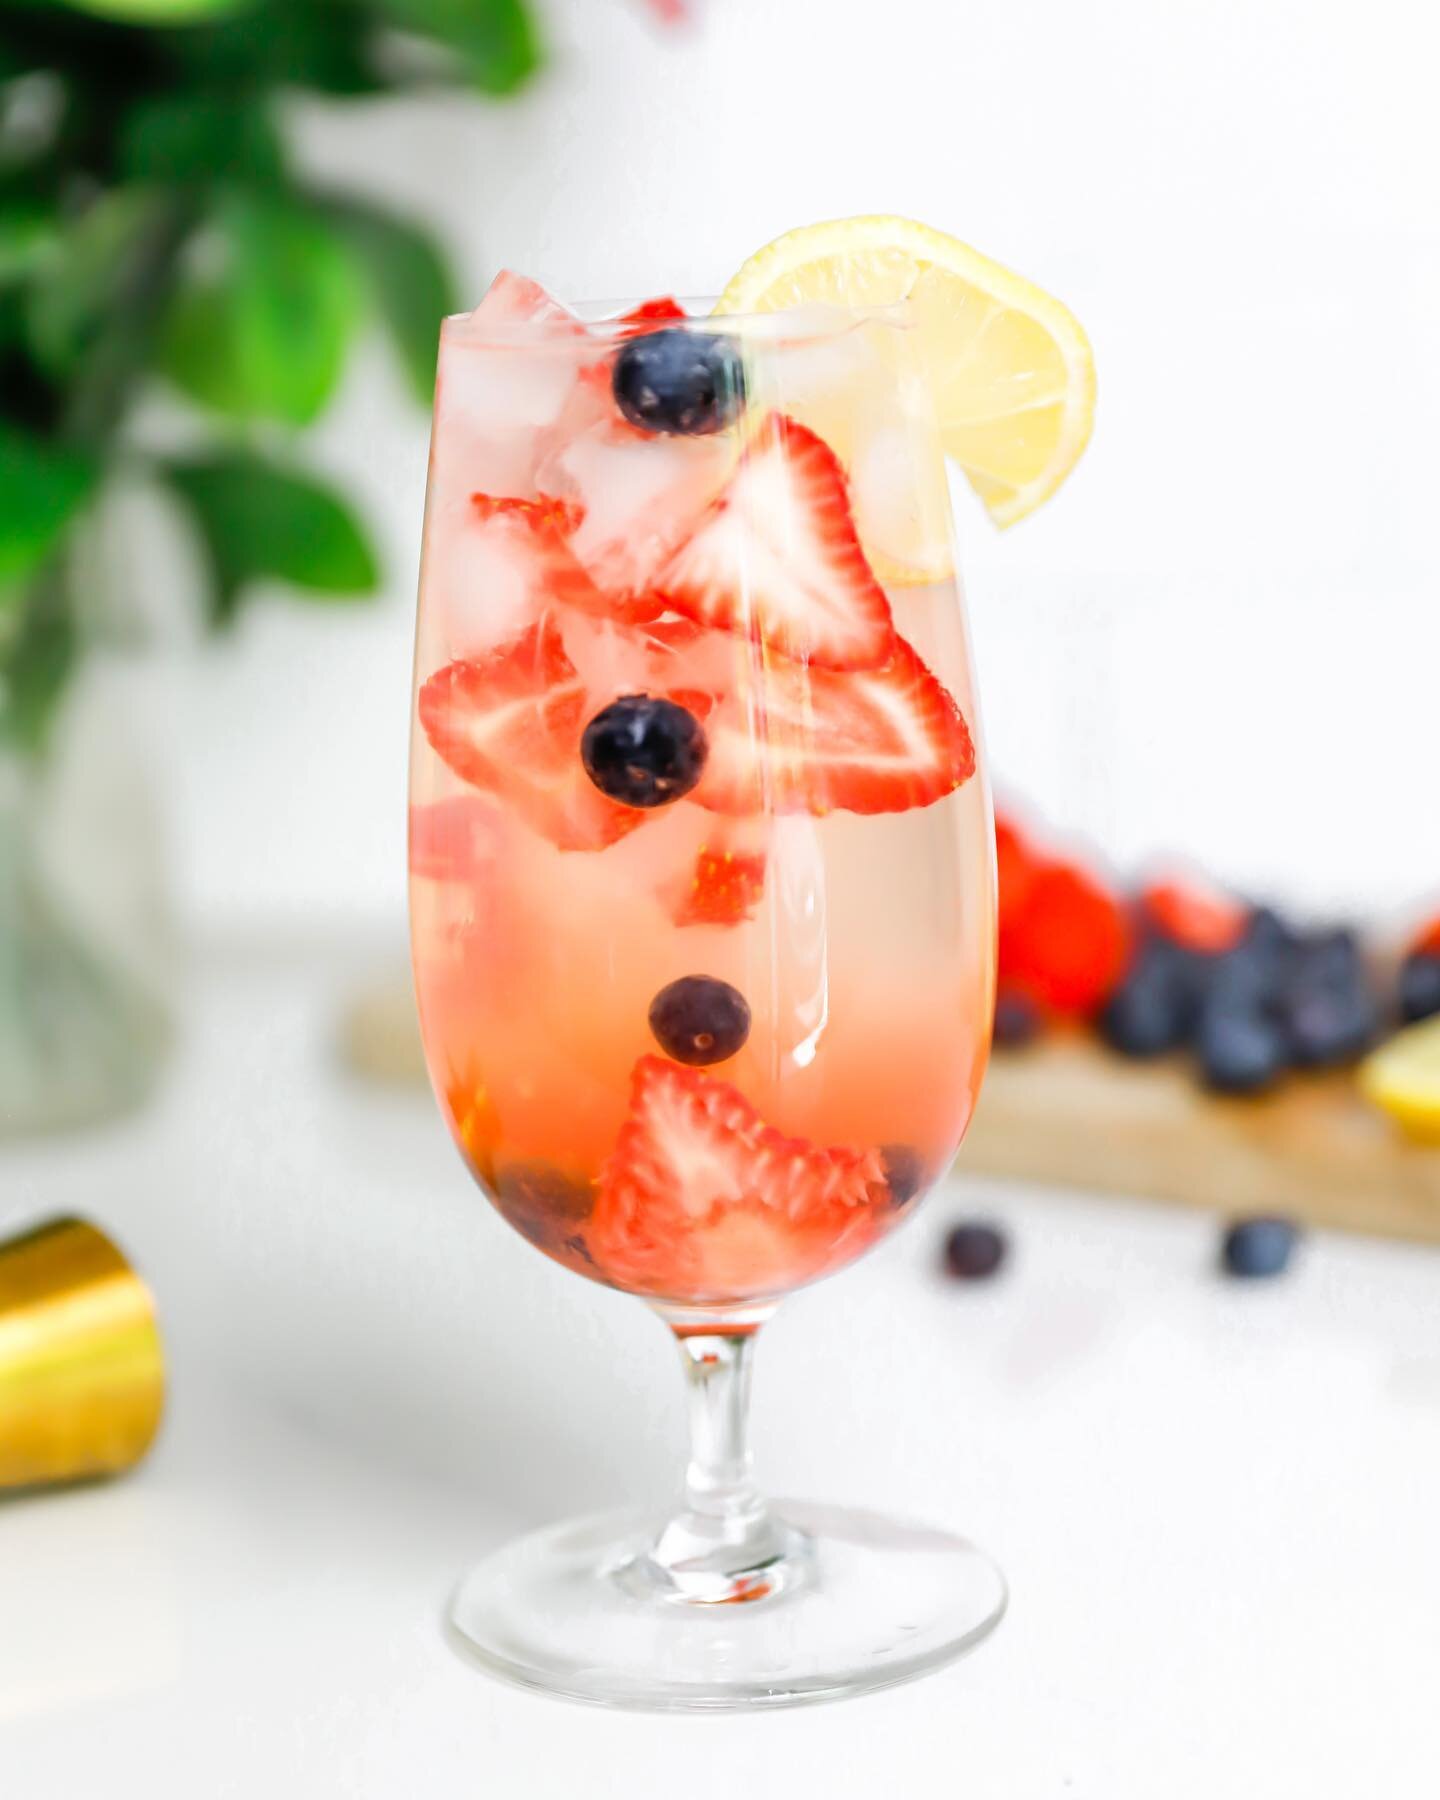 Berry Lemon Spiked Seltzer 🍓🤍🫐🍋

Memorial Day is almost here and this berry lemon spiked seltzer is perfect to stay hydrated while having fun! 

INGREDIENTS
* 2 ounces vodka
* 3 ounces lemonade
* sparkling water
* sliced strawberries
* blueberrie